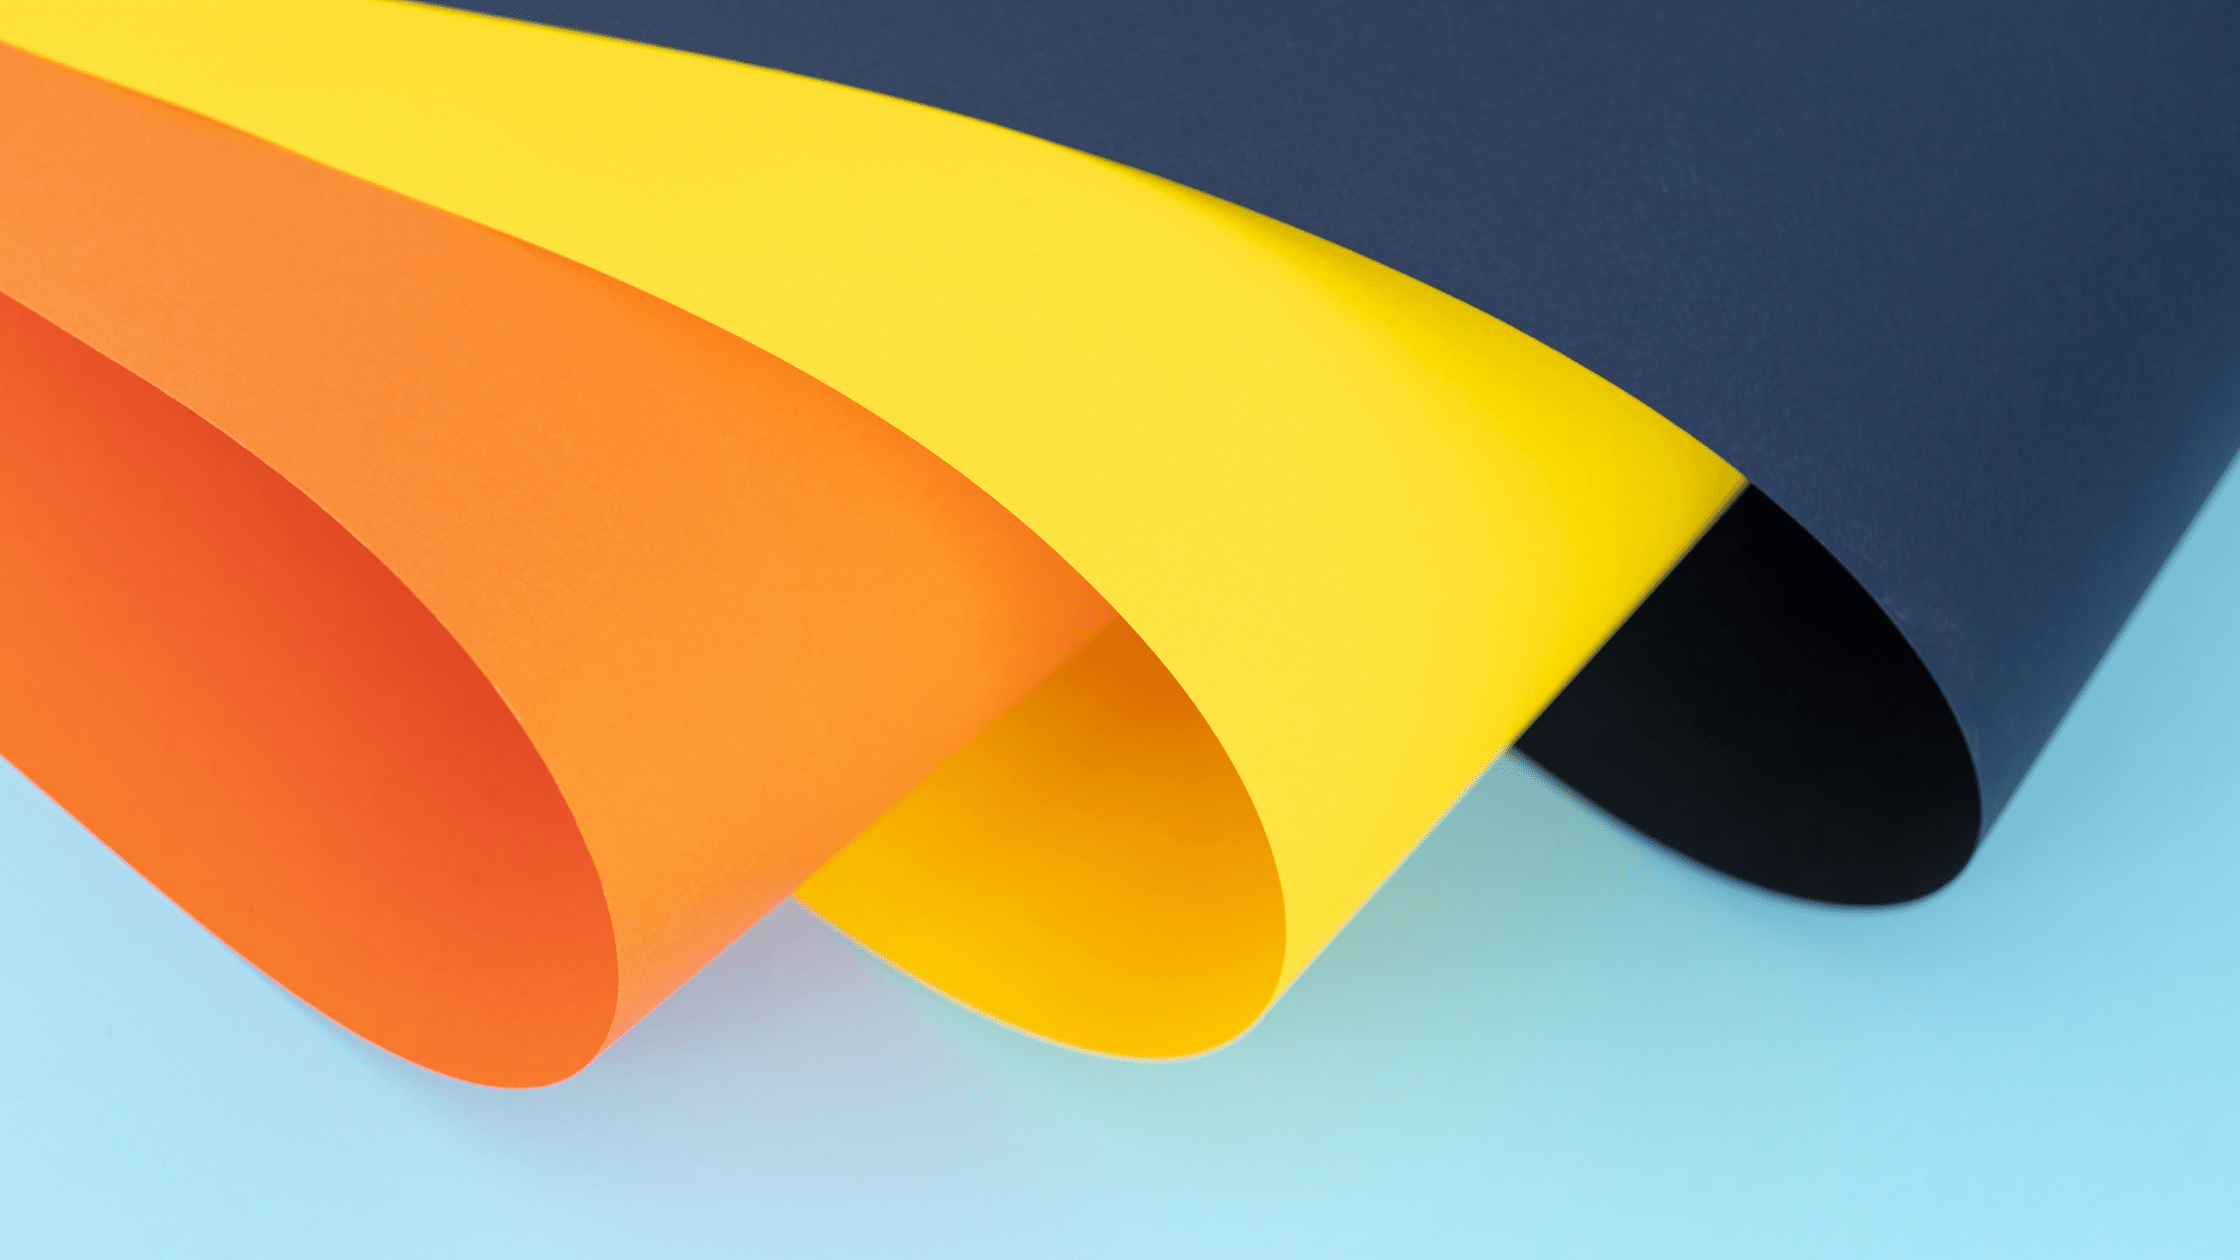 Orange, yellow, and blue construction paper folded halfway against a light blue background